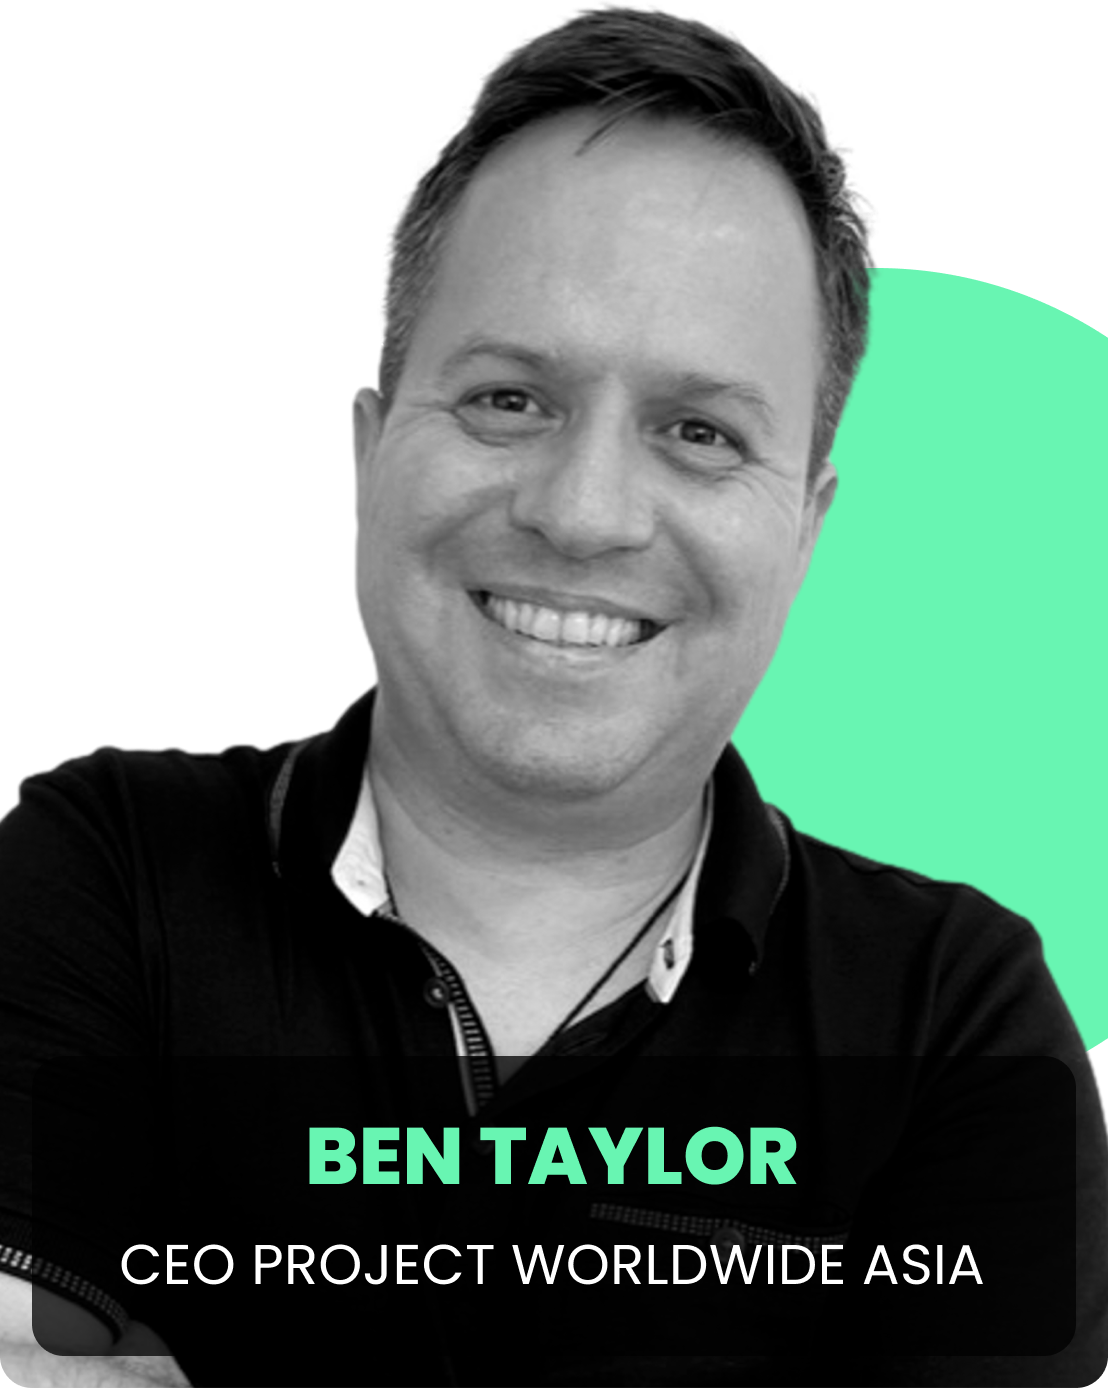 Ben Taylor, CEO Project Worldwide Asia